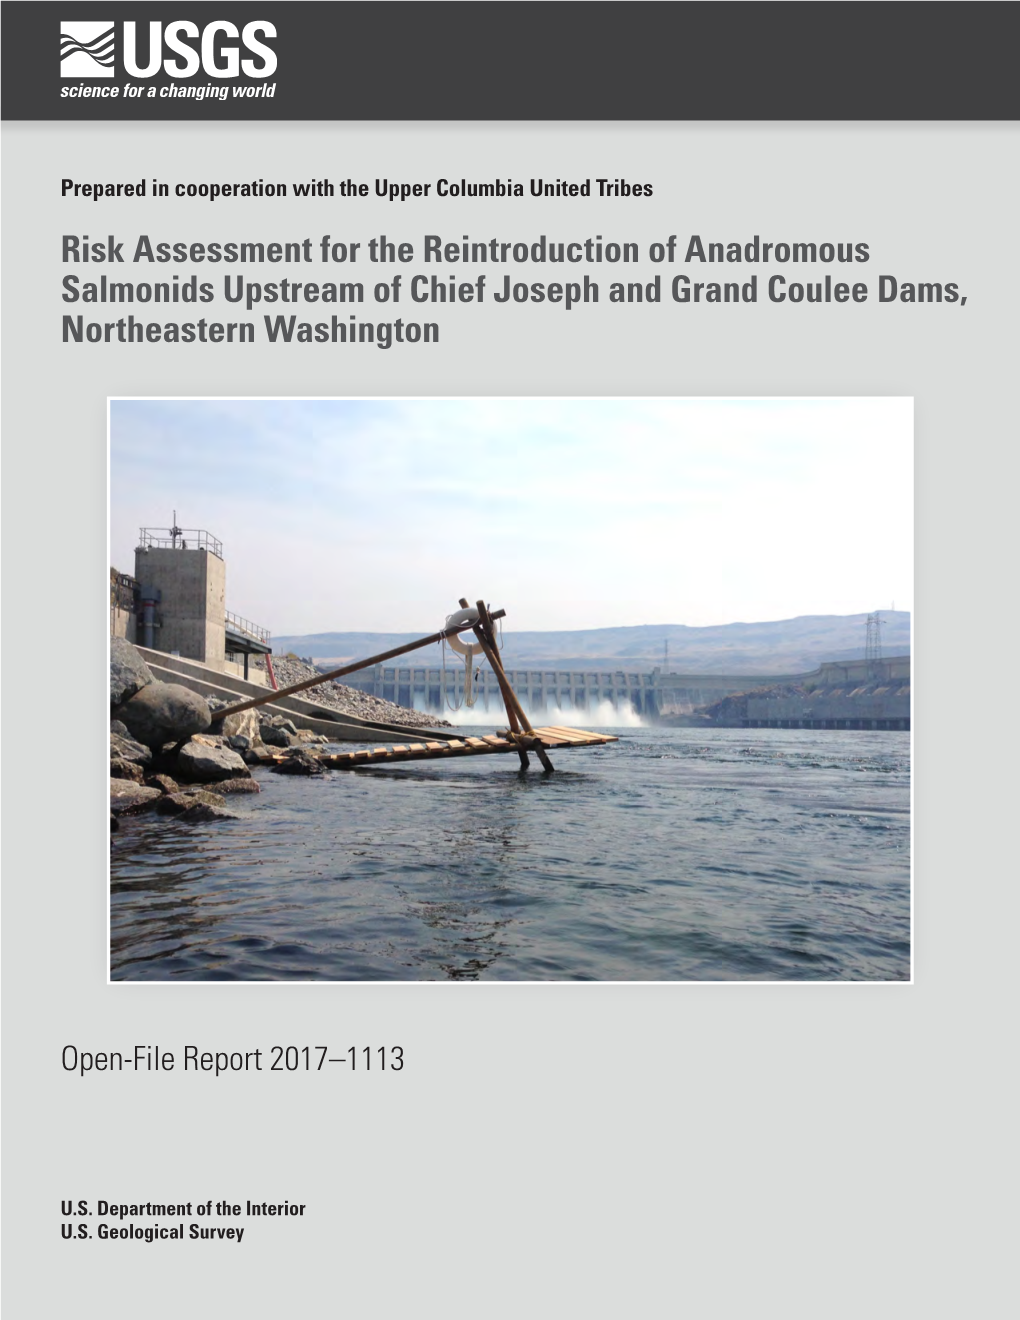 Risk Assessment for the Reintroduction of Anadromous Salmonids Upstream of Chief Joseph and Grand Coulee Dams, Northeastern Washington